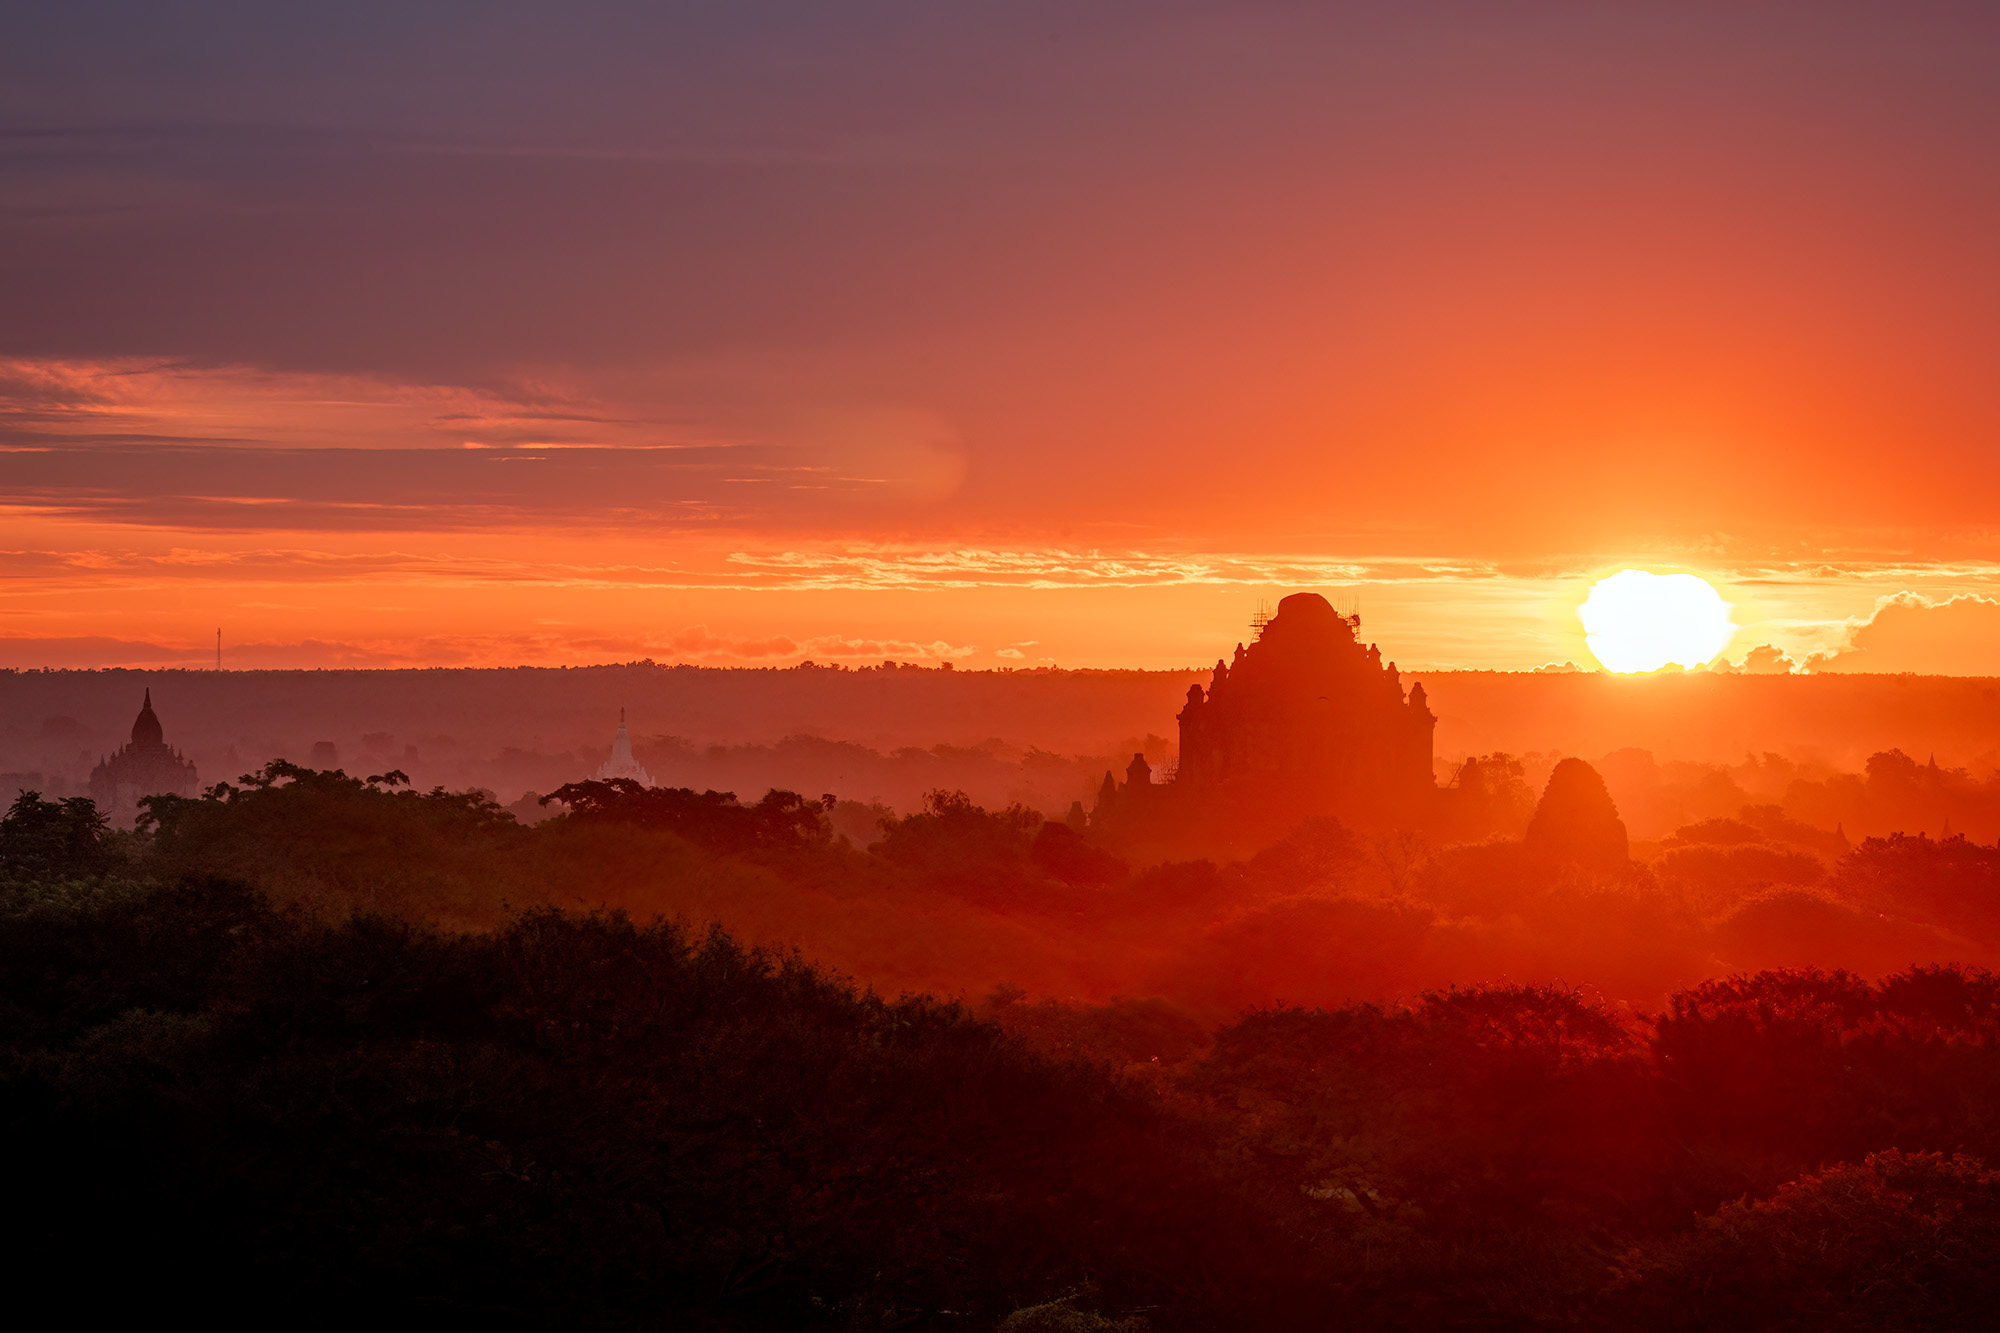 "Fiery Horizon" captures a mesmerizing Bagan sunset, where nature paints the sky in vivid shades of orange and yellow. The silhouettes...